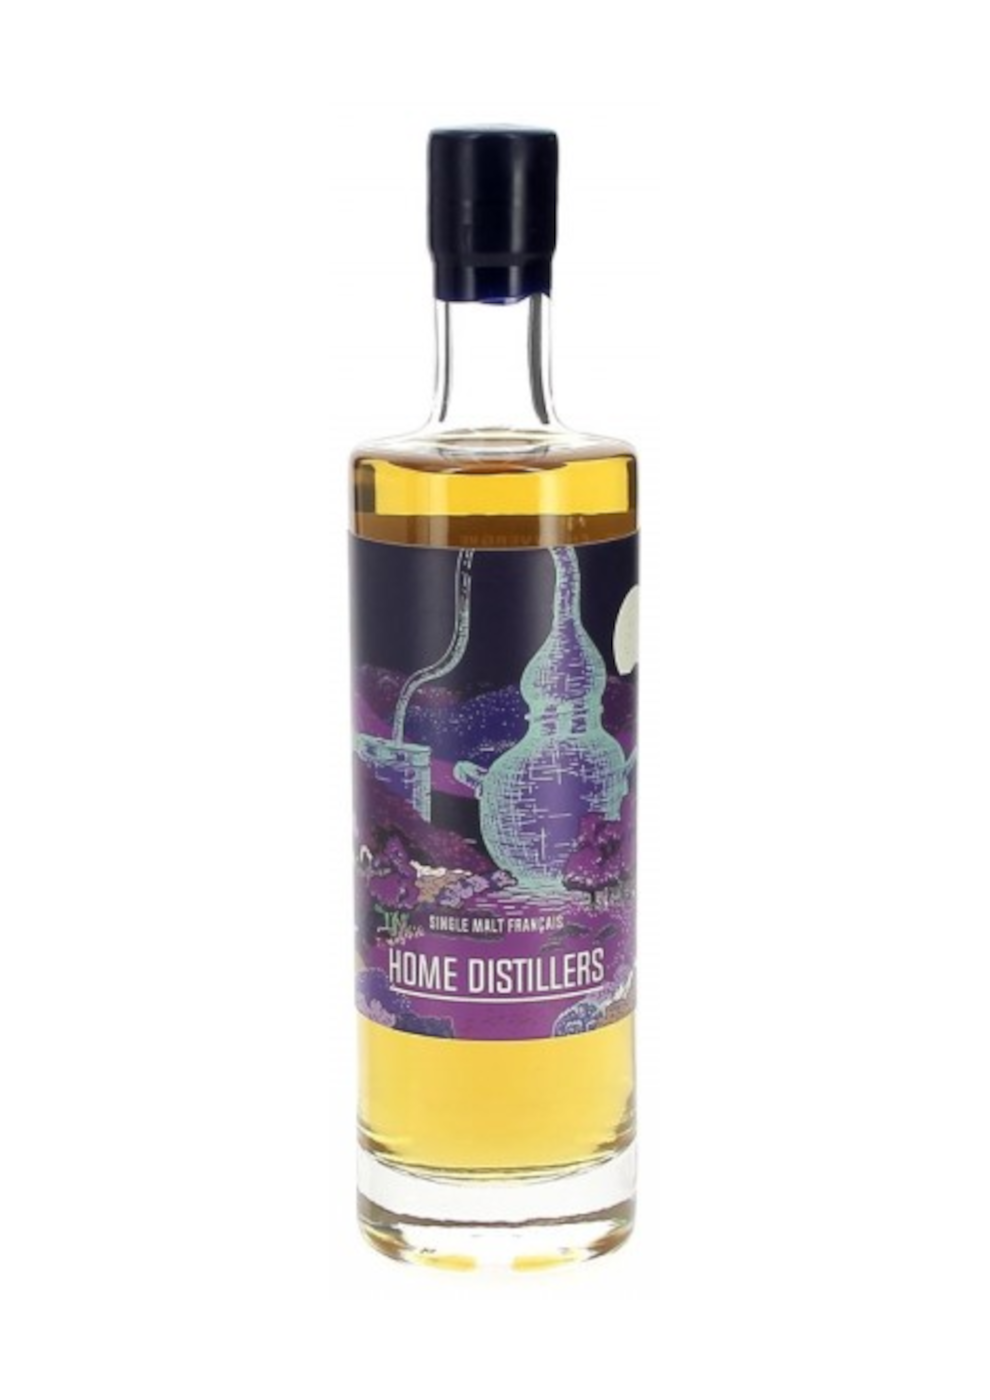 Home Distillers Le Mandrant